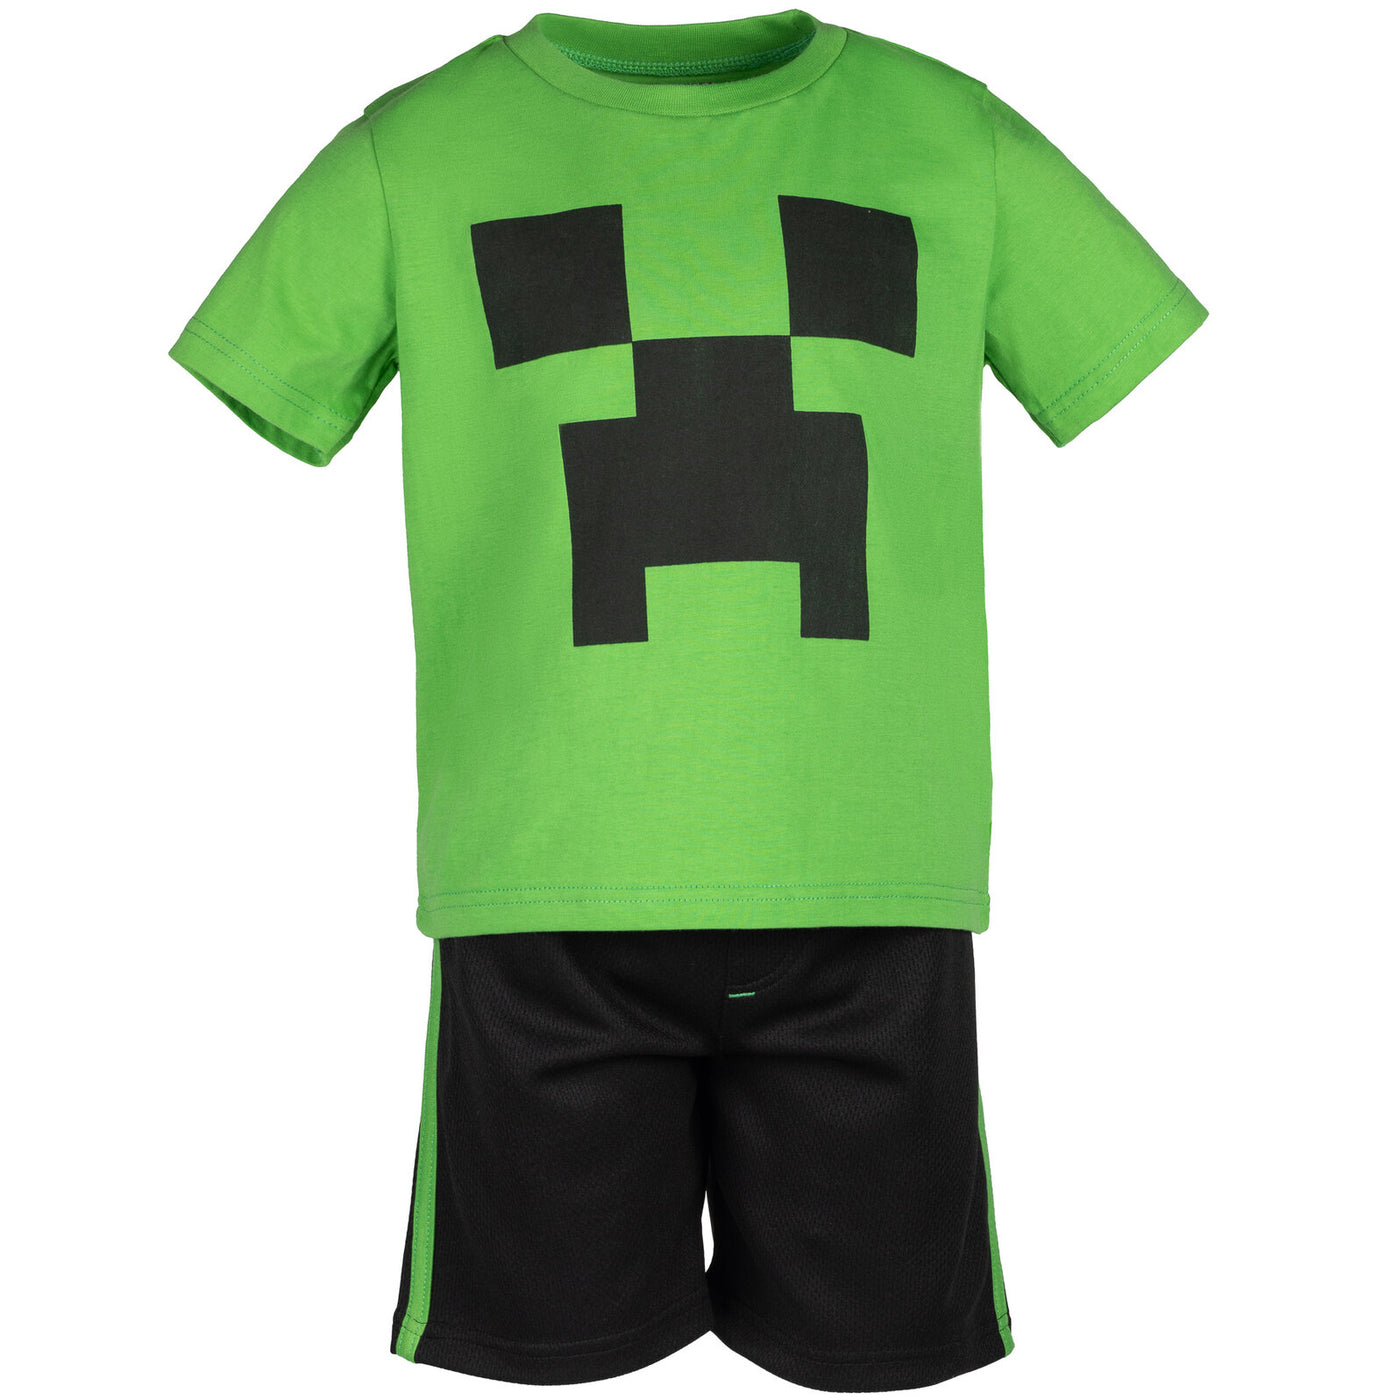 Minecraft Creeper T-Shirt and Mesh Shorts Outfit Set